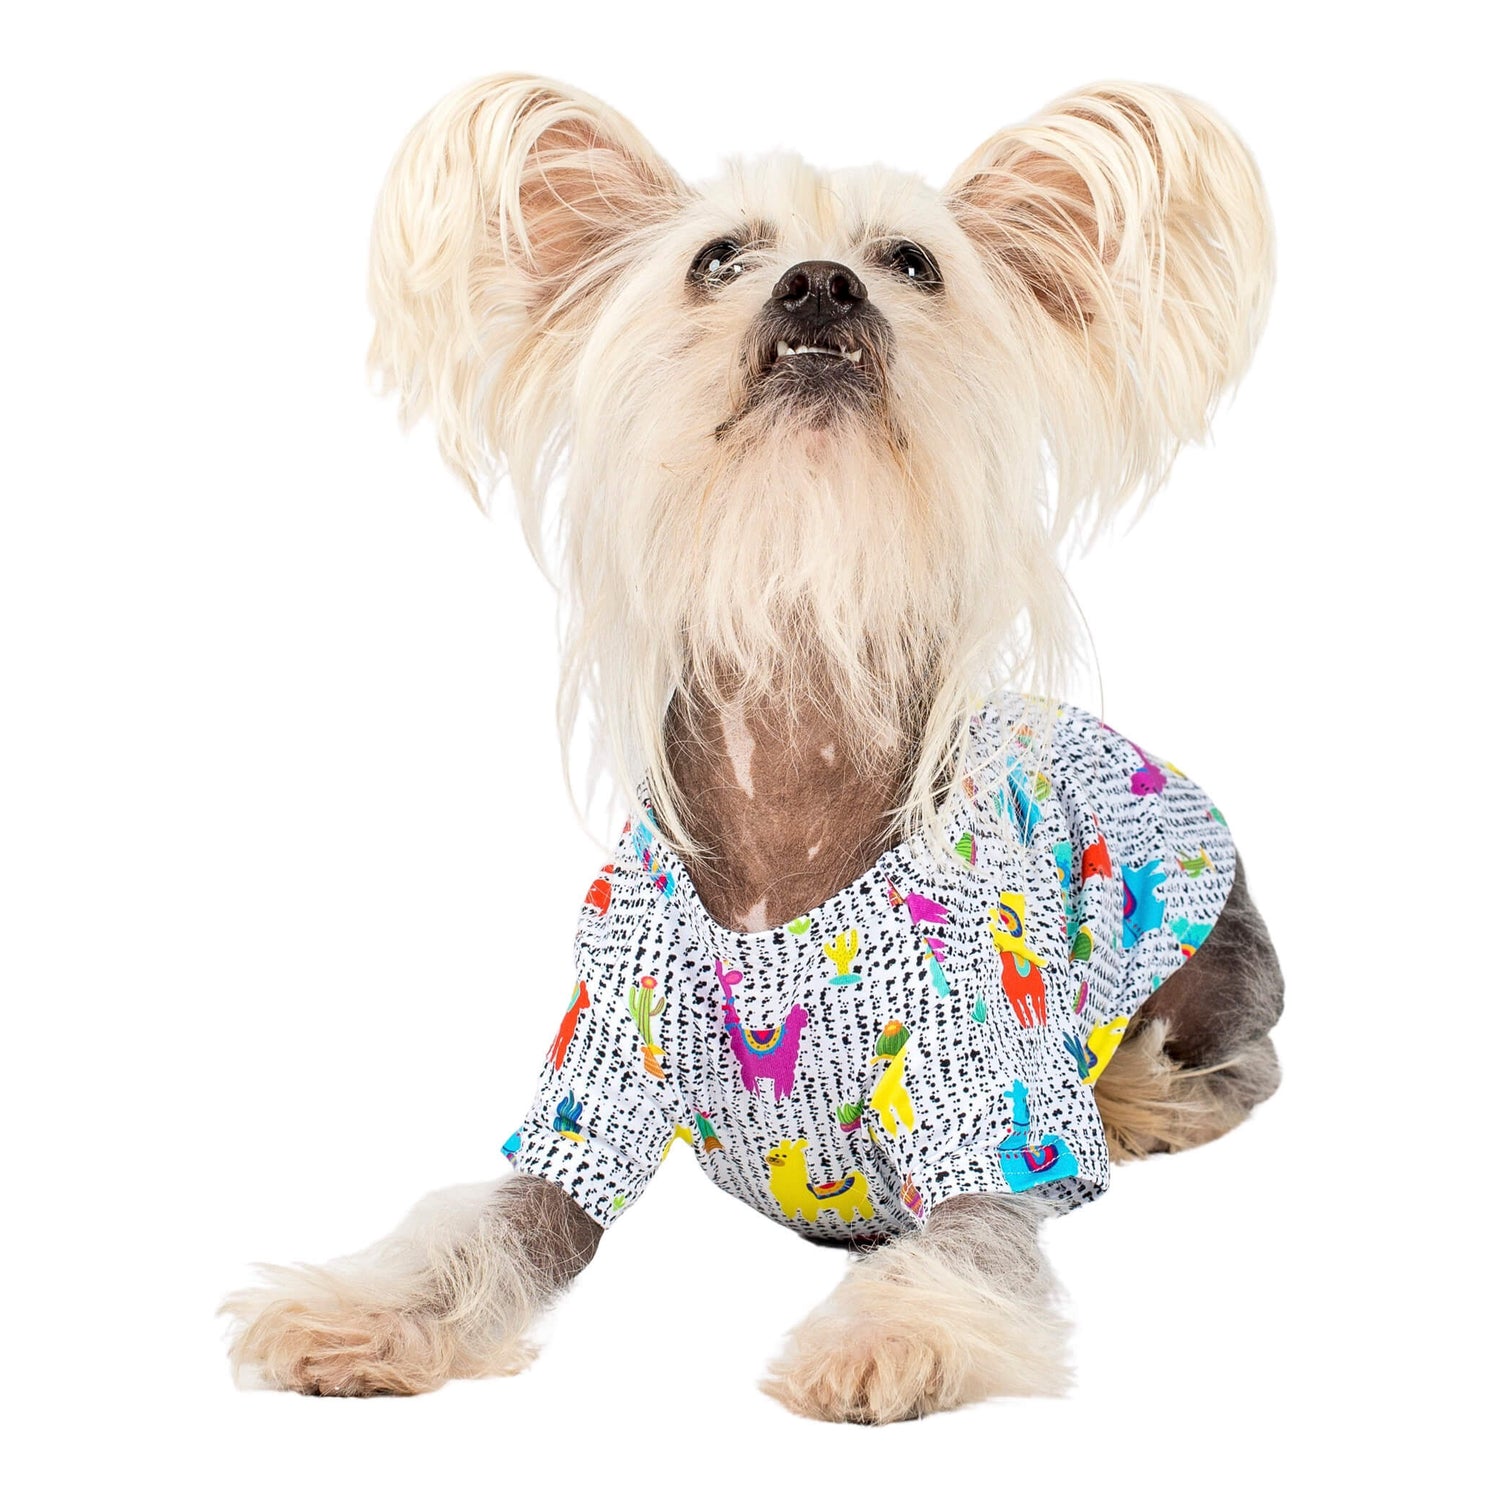 A Chinese Crested dog laying down wearing Vibrant Hounds No Probllama shirt for dogs. The shirt has bright coloured Llamas printed on it.